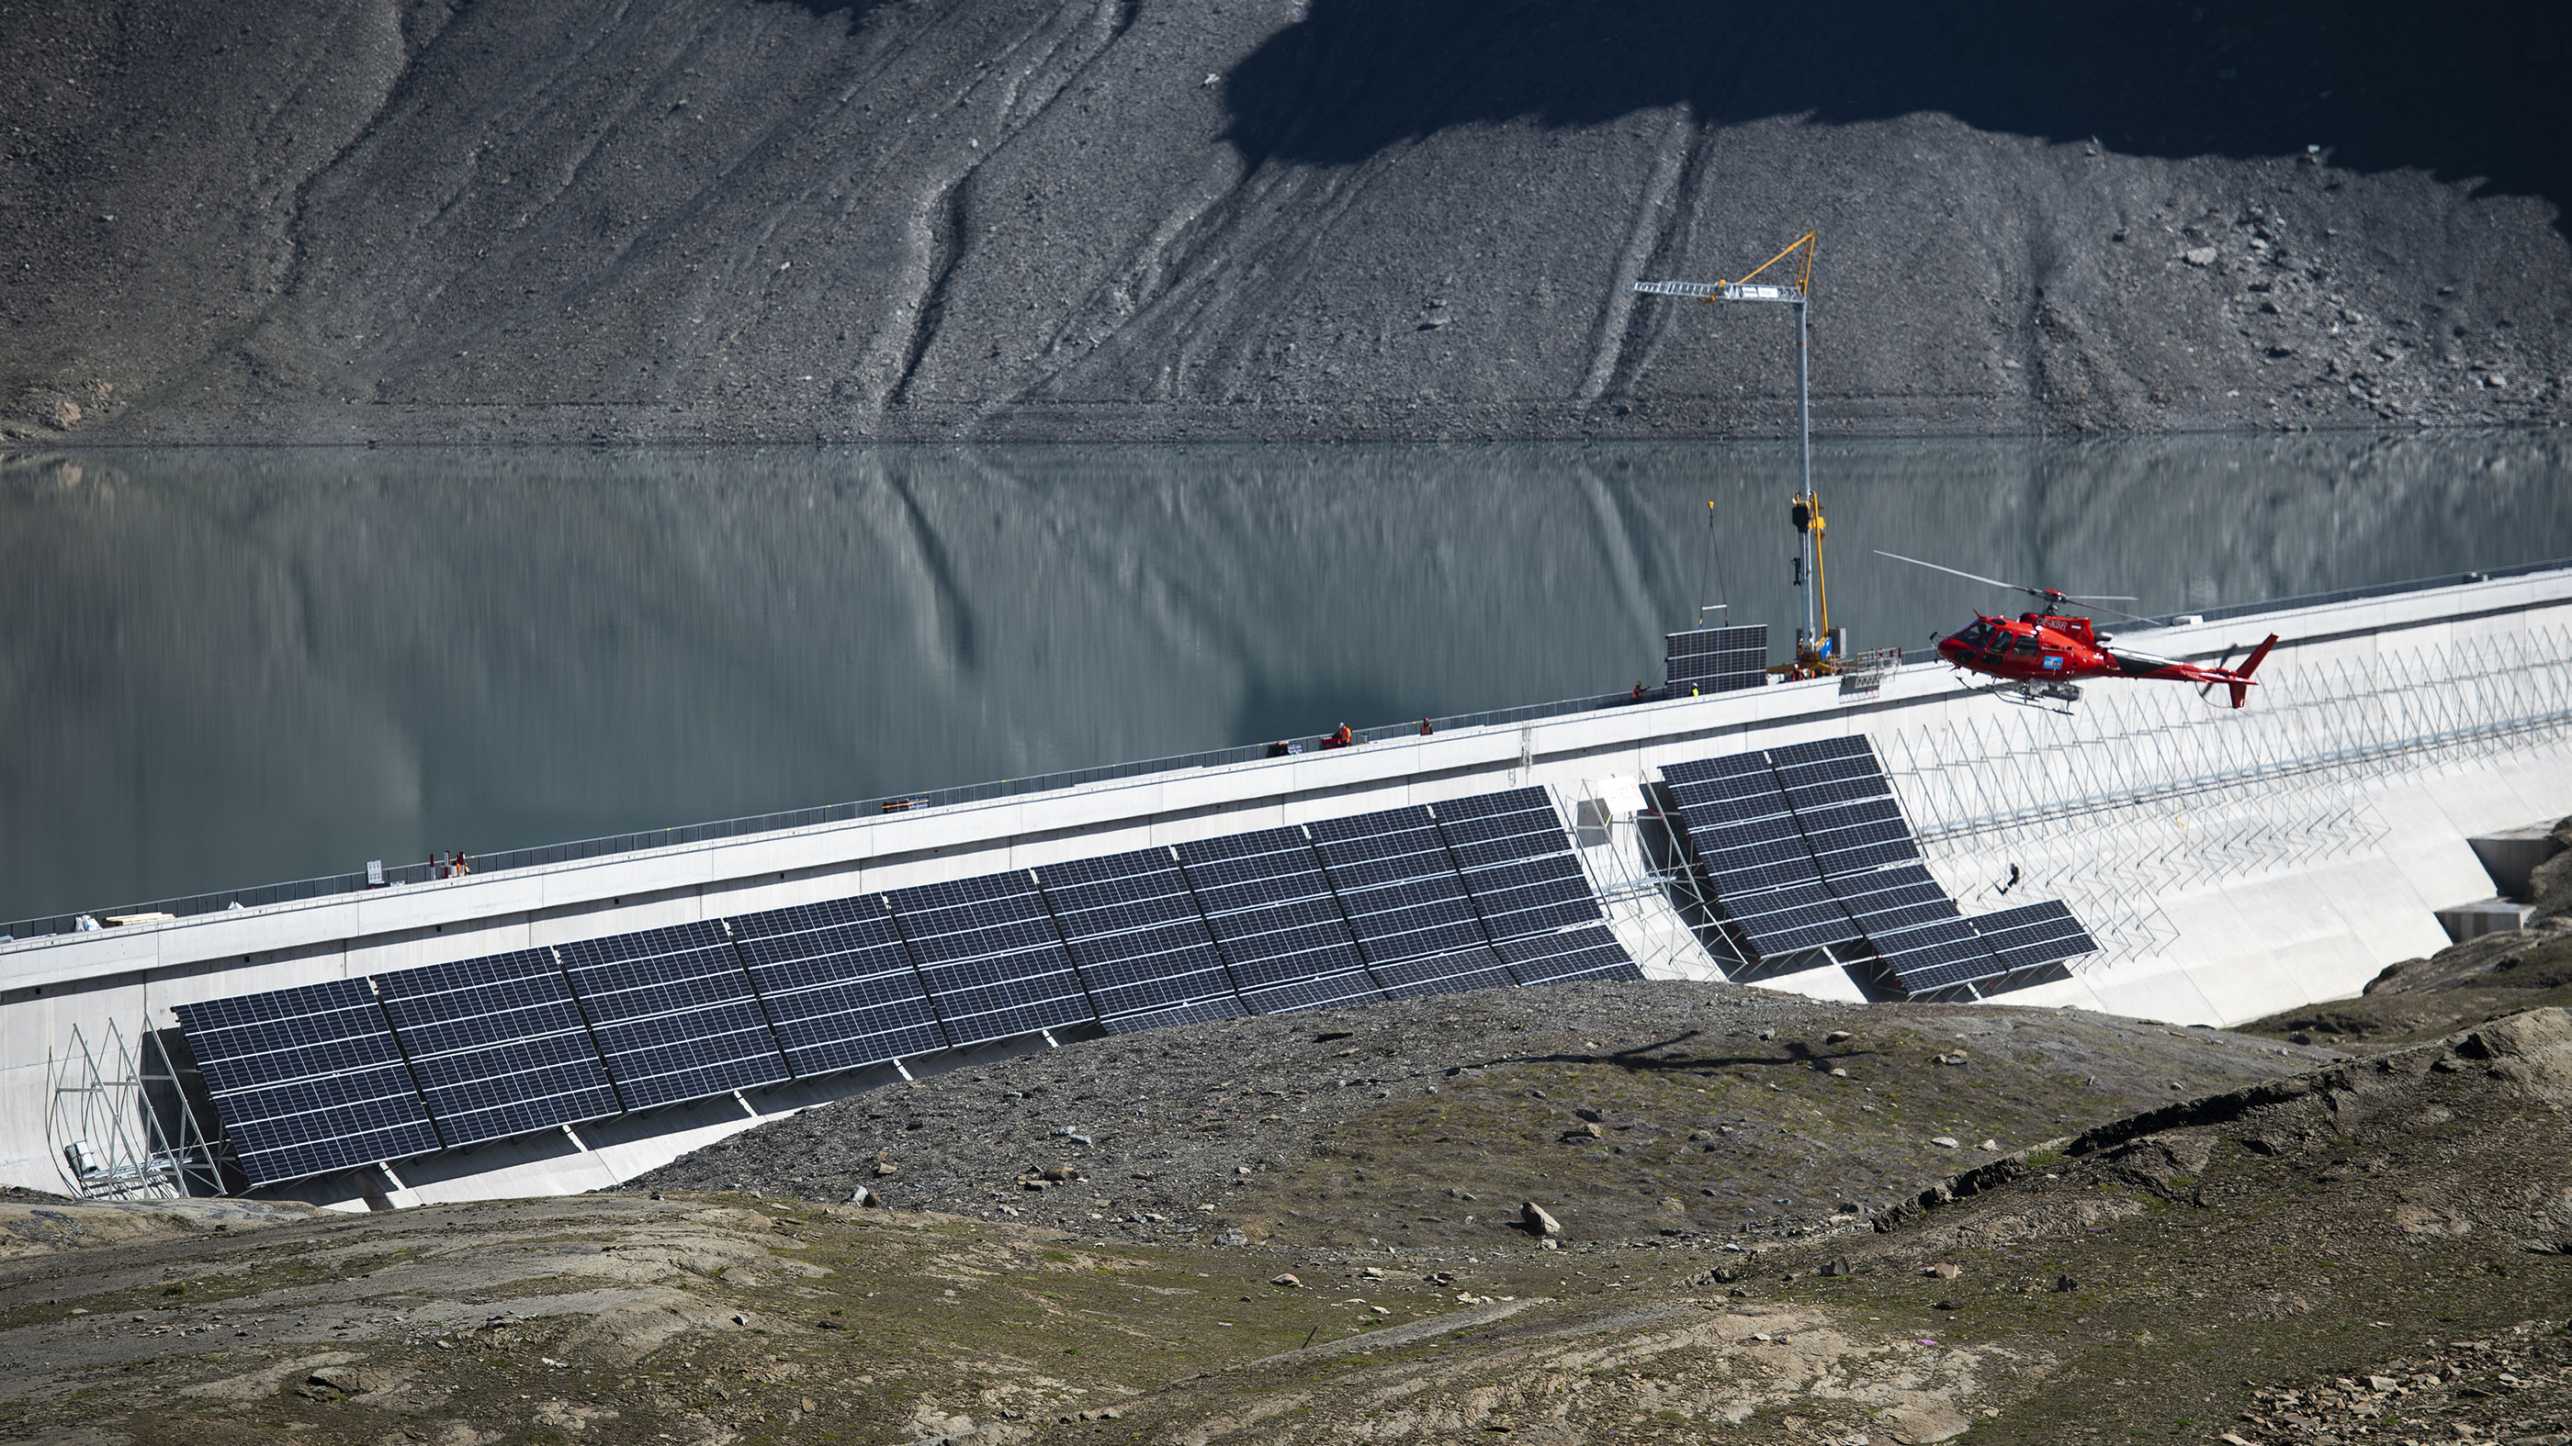 Muttsee dam in Linthal, solar panels are installed.